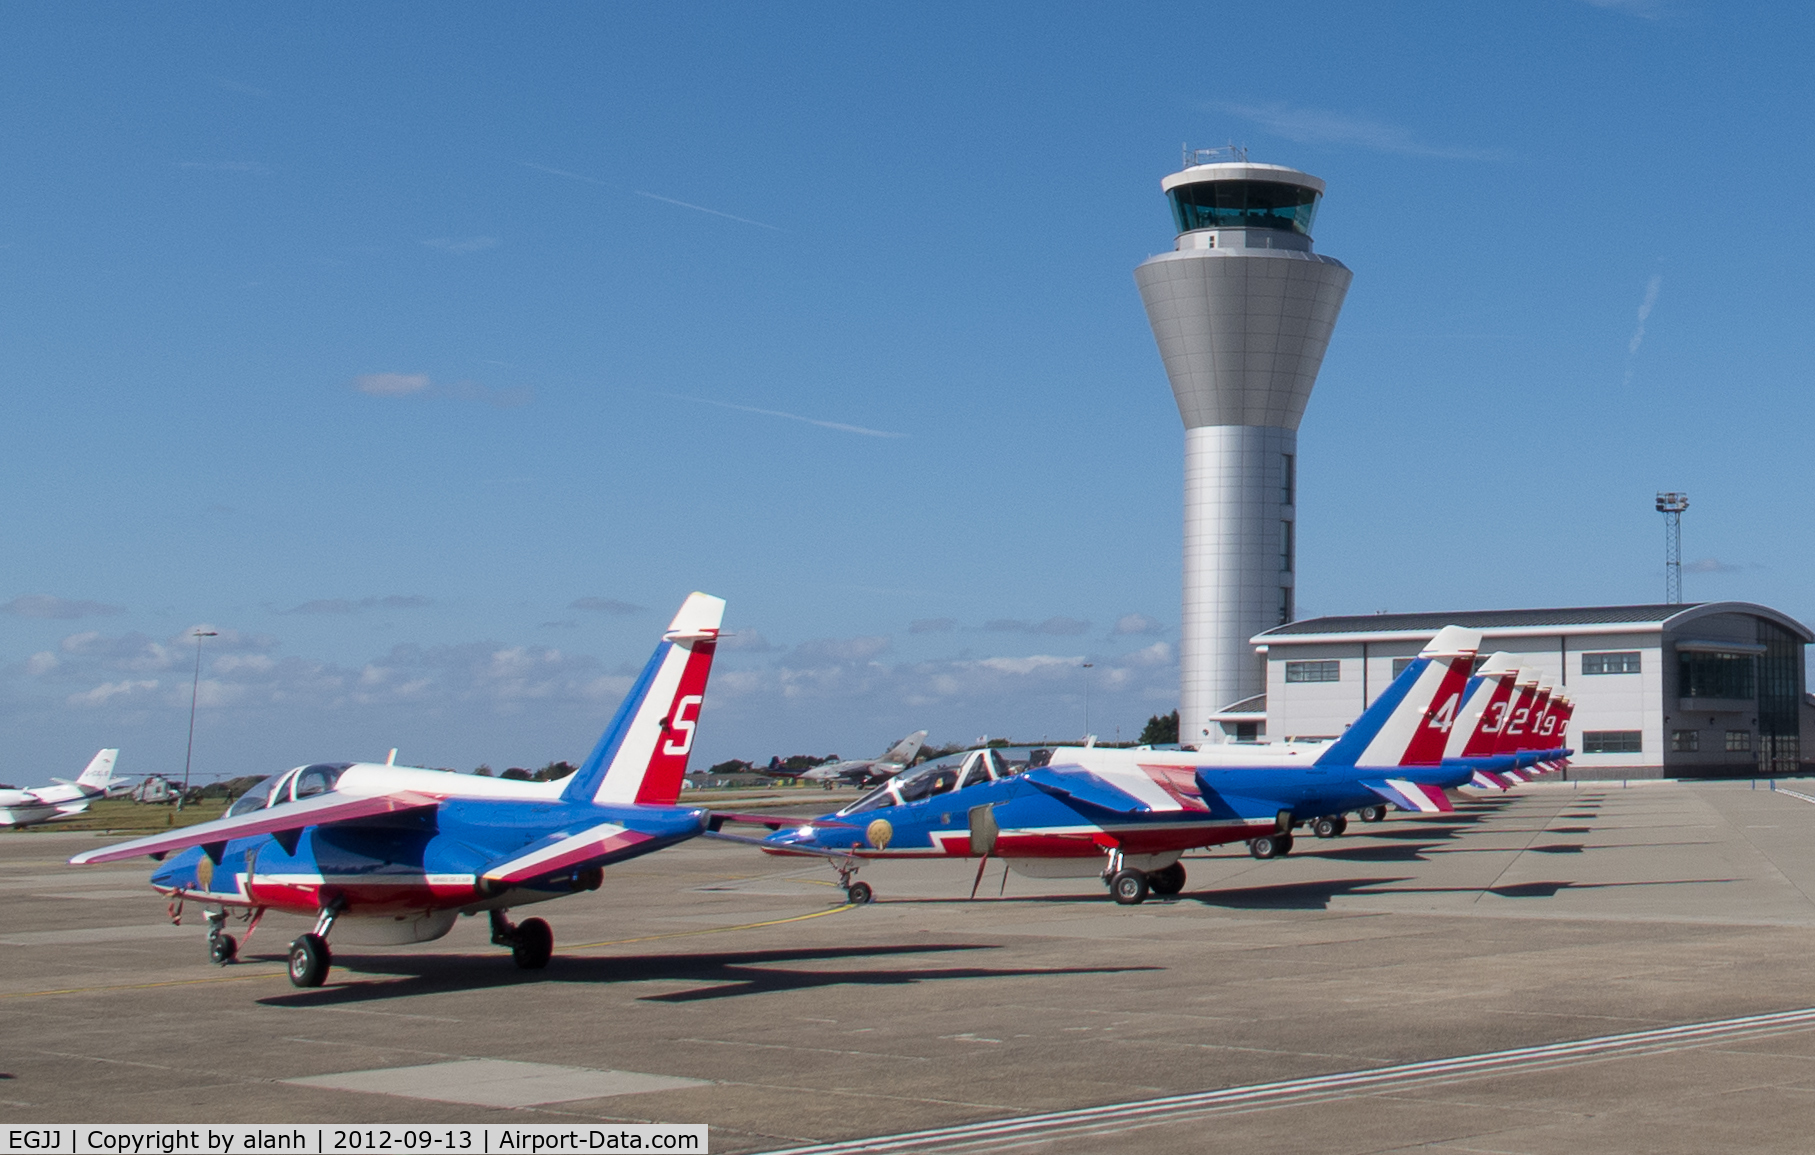 Jersey Airport, Jersey, Channel Islands United Kingdom (EGJJ) - Alpha Jets of the Patrouille de France lined up on Jersey Air Show day, 2012